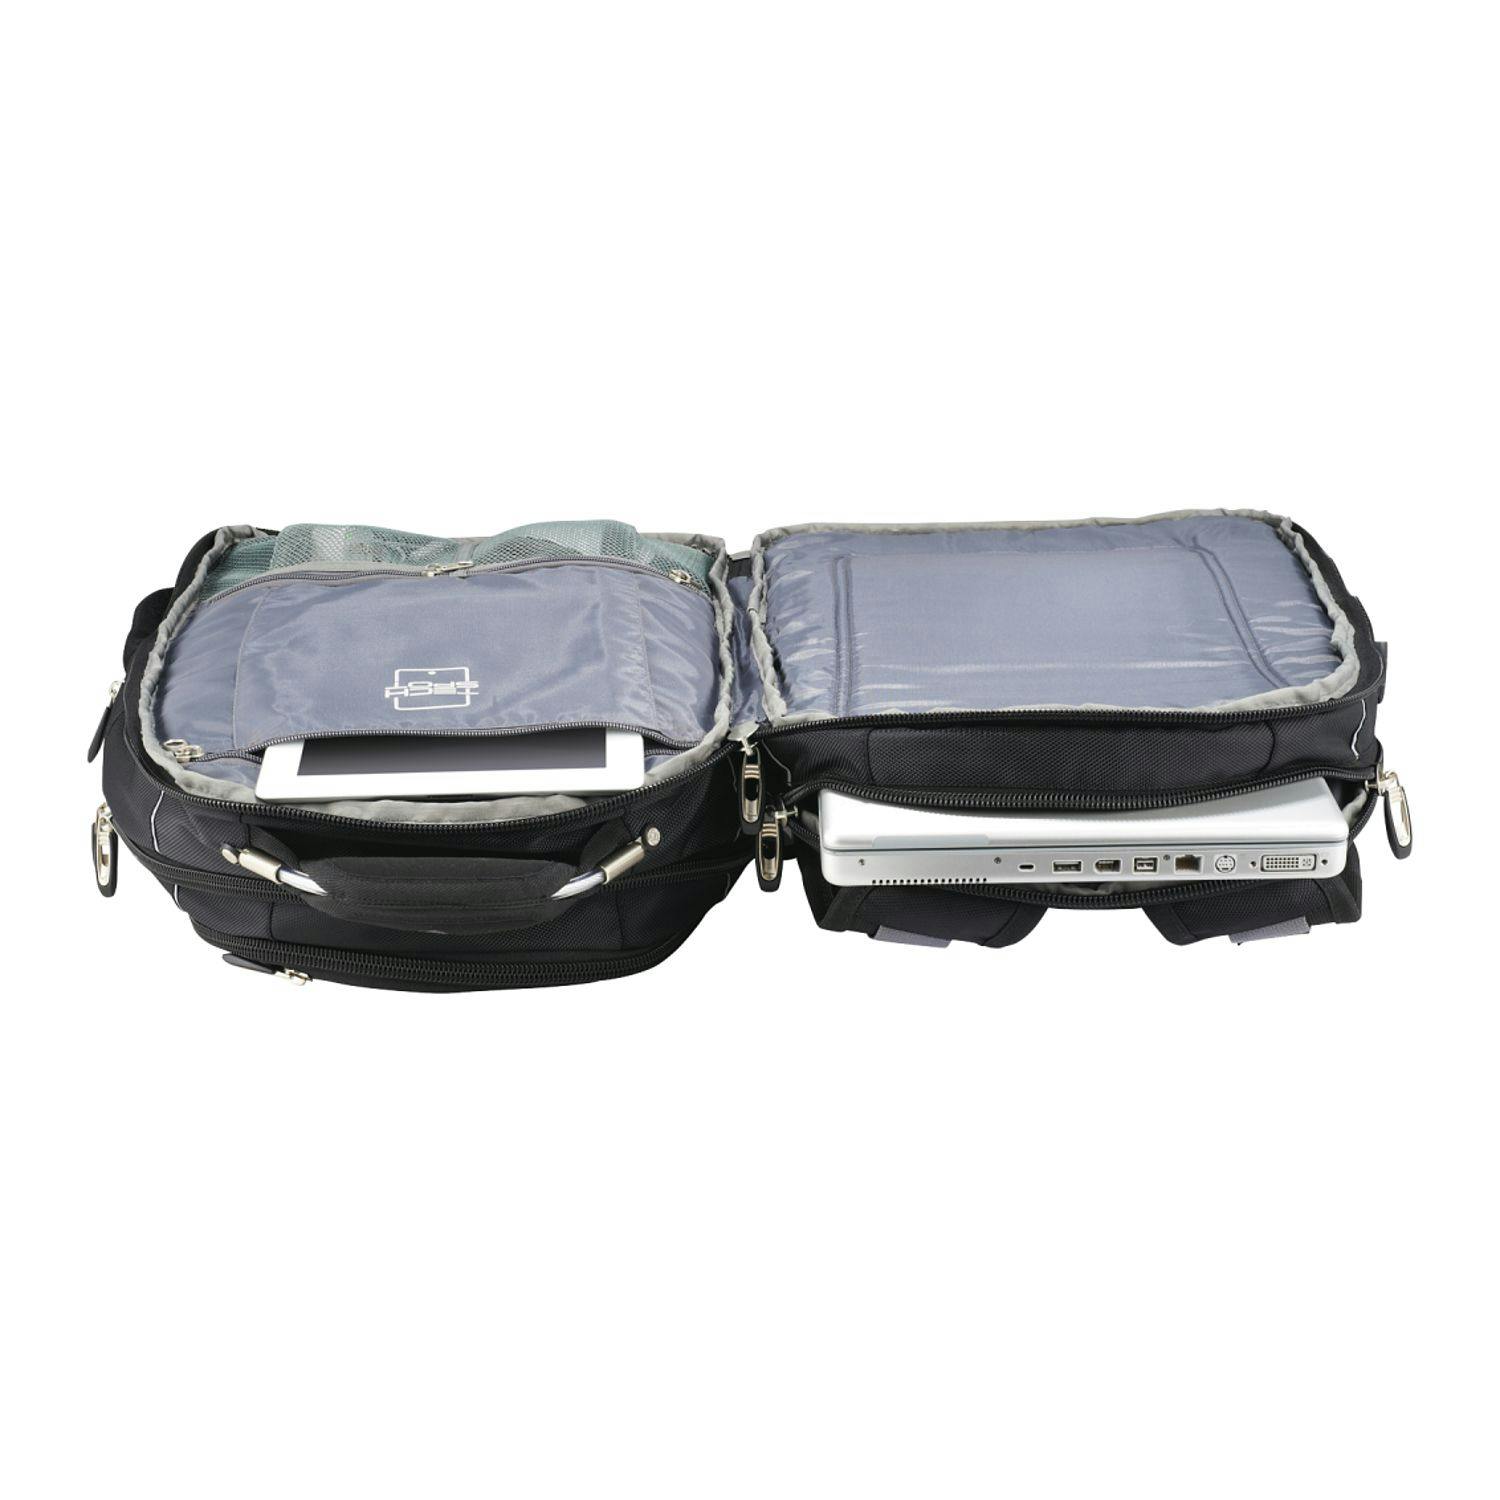 High Sierra Elite Fly-By 17" Computer Backpack - additional Image 5